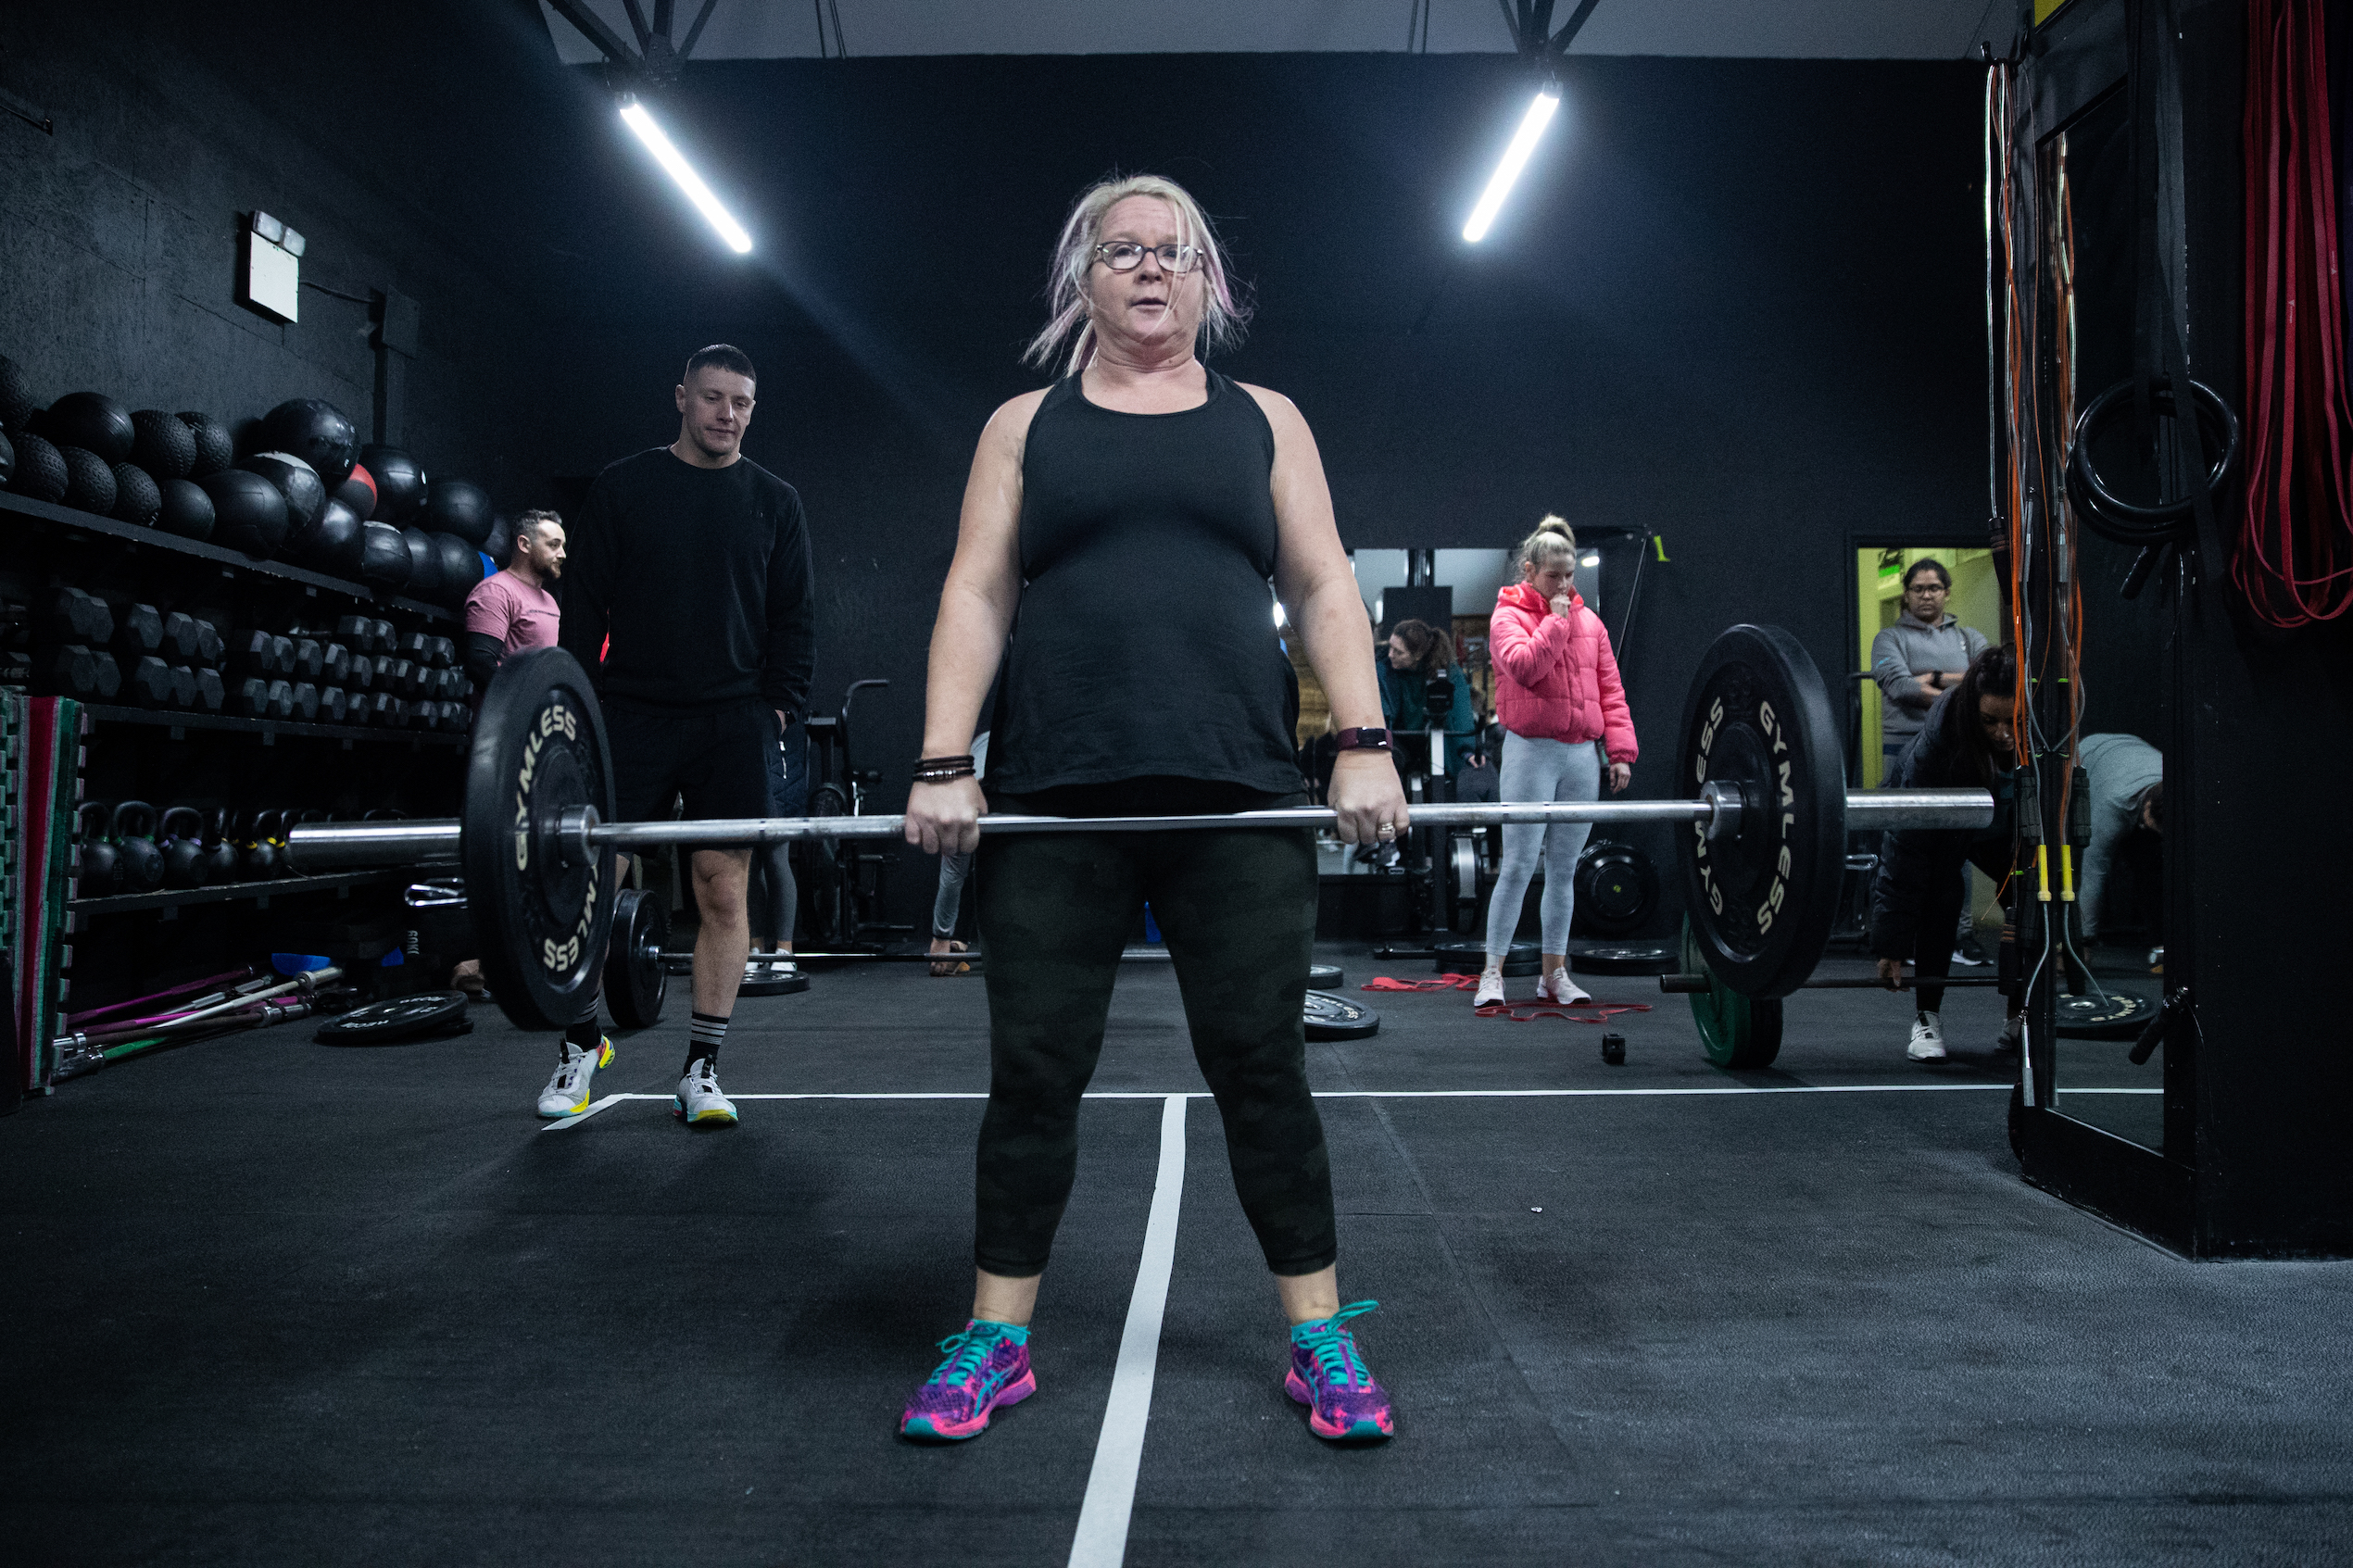 Middle-aged woman at the top of a deadlift.